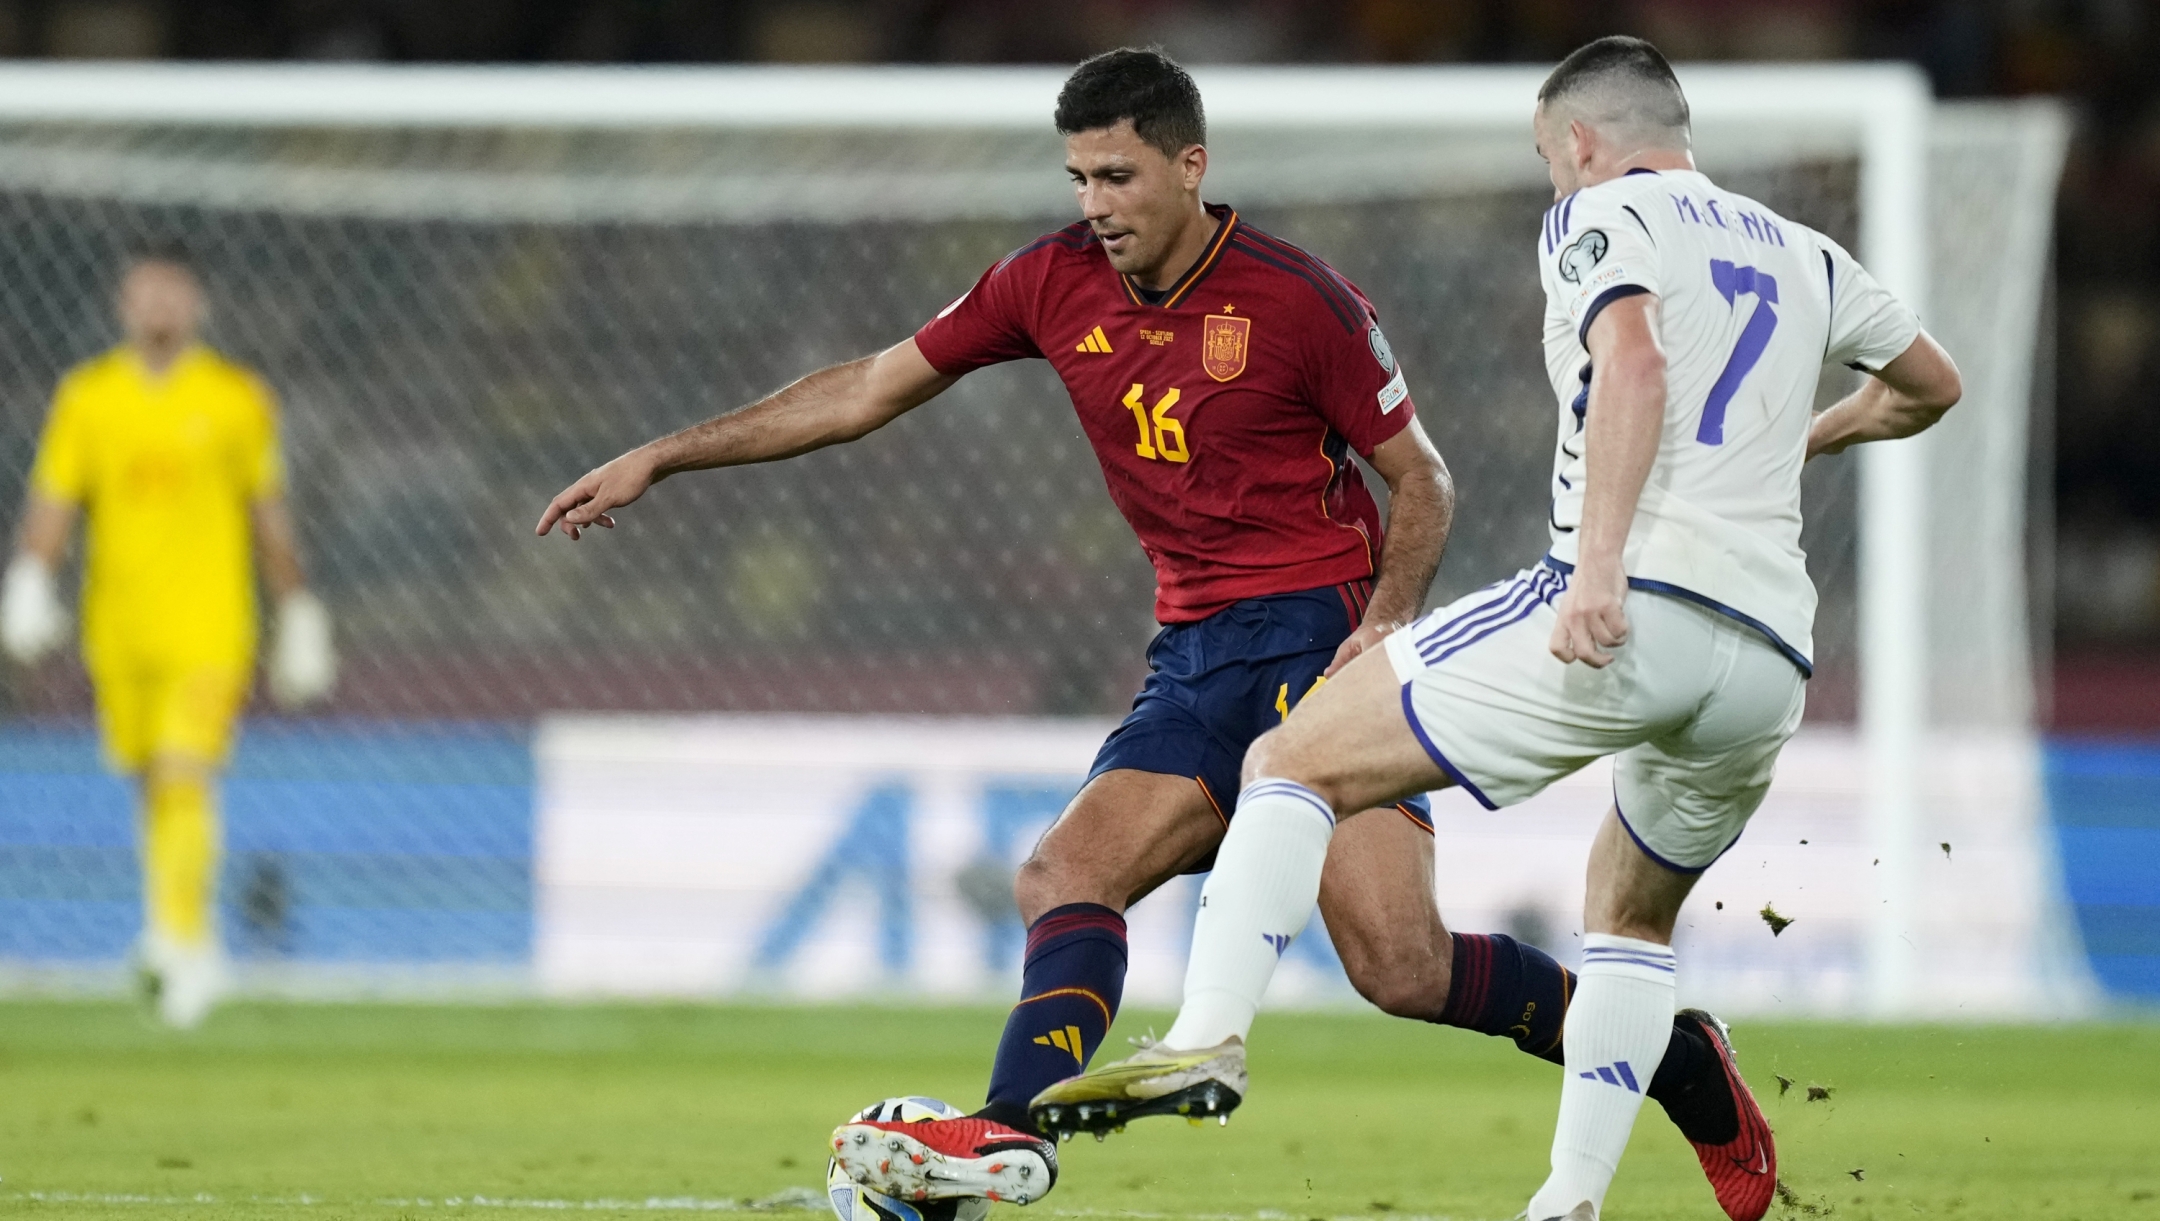 Spain's Rodri tries to dribble the ball past Scotland's John McGinn, right, during the Euro 2024 group A qualifying soccer match between Spain and Scotland at La Cartuja stadium in Seville, Spain, Thursday, Oct. 12, 2023. (AP Photo/Jose Breton)